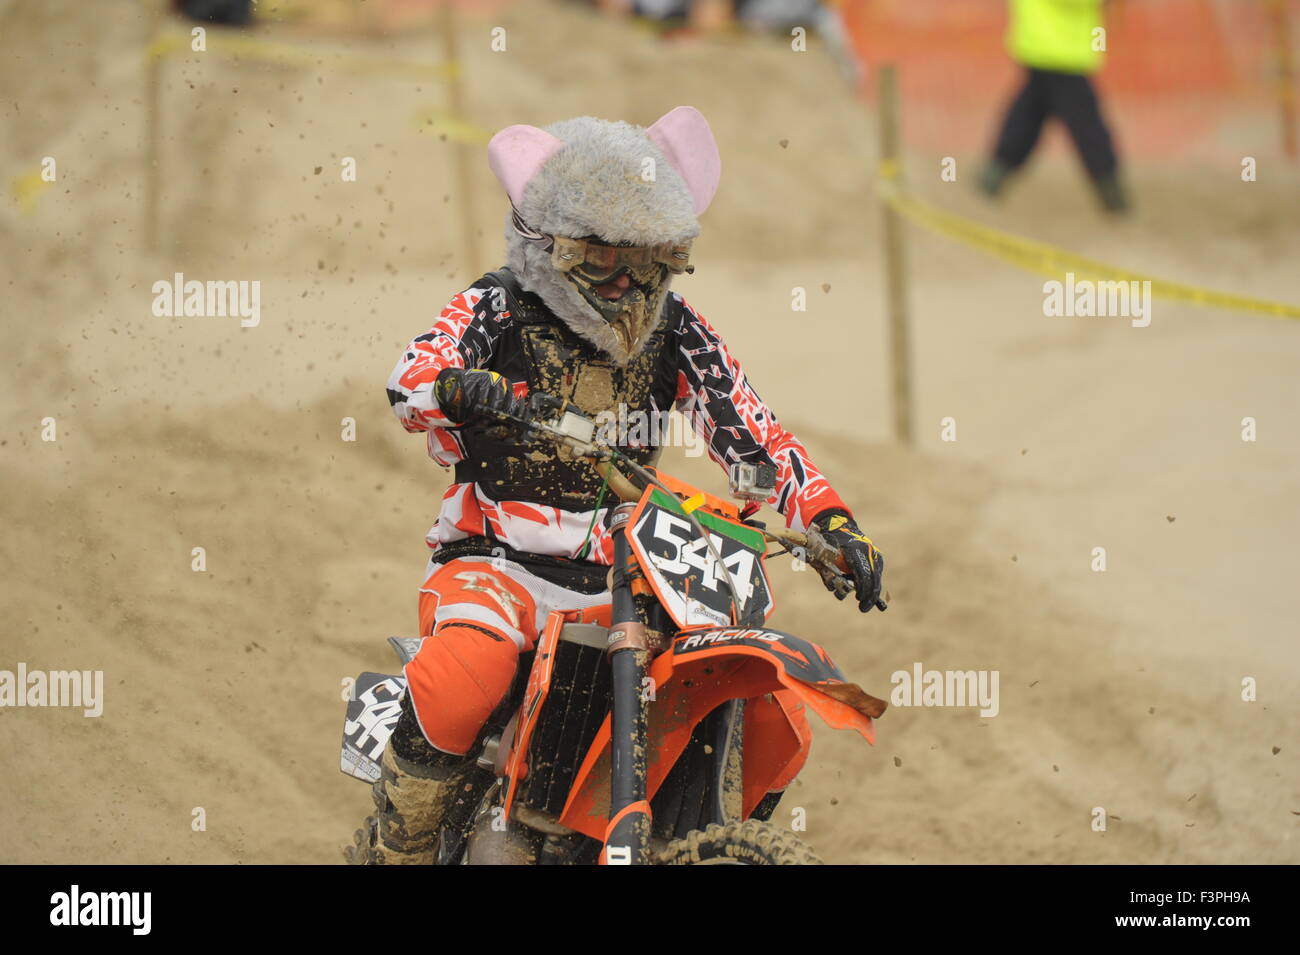 Weymouth, Dorset, UK - 11th October 2015. Annual Lion's Beach motocross weekend on Weymouth Beach.  Weymouth & Portland Lion's  jointly organise the popular event with Purbeck Motocross Club which attracts hundreds of riders, who test themselves on the tricky beach course - A rider who has added mouse ears to his helmet - Picture: Graham Hunt/Alamy Live News Stock Photo